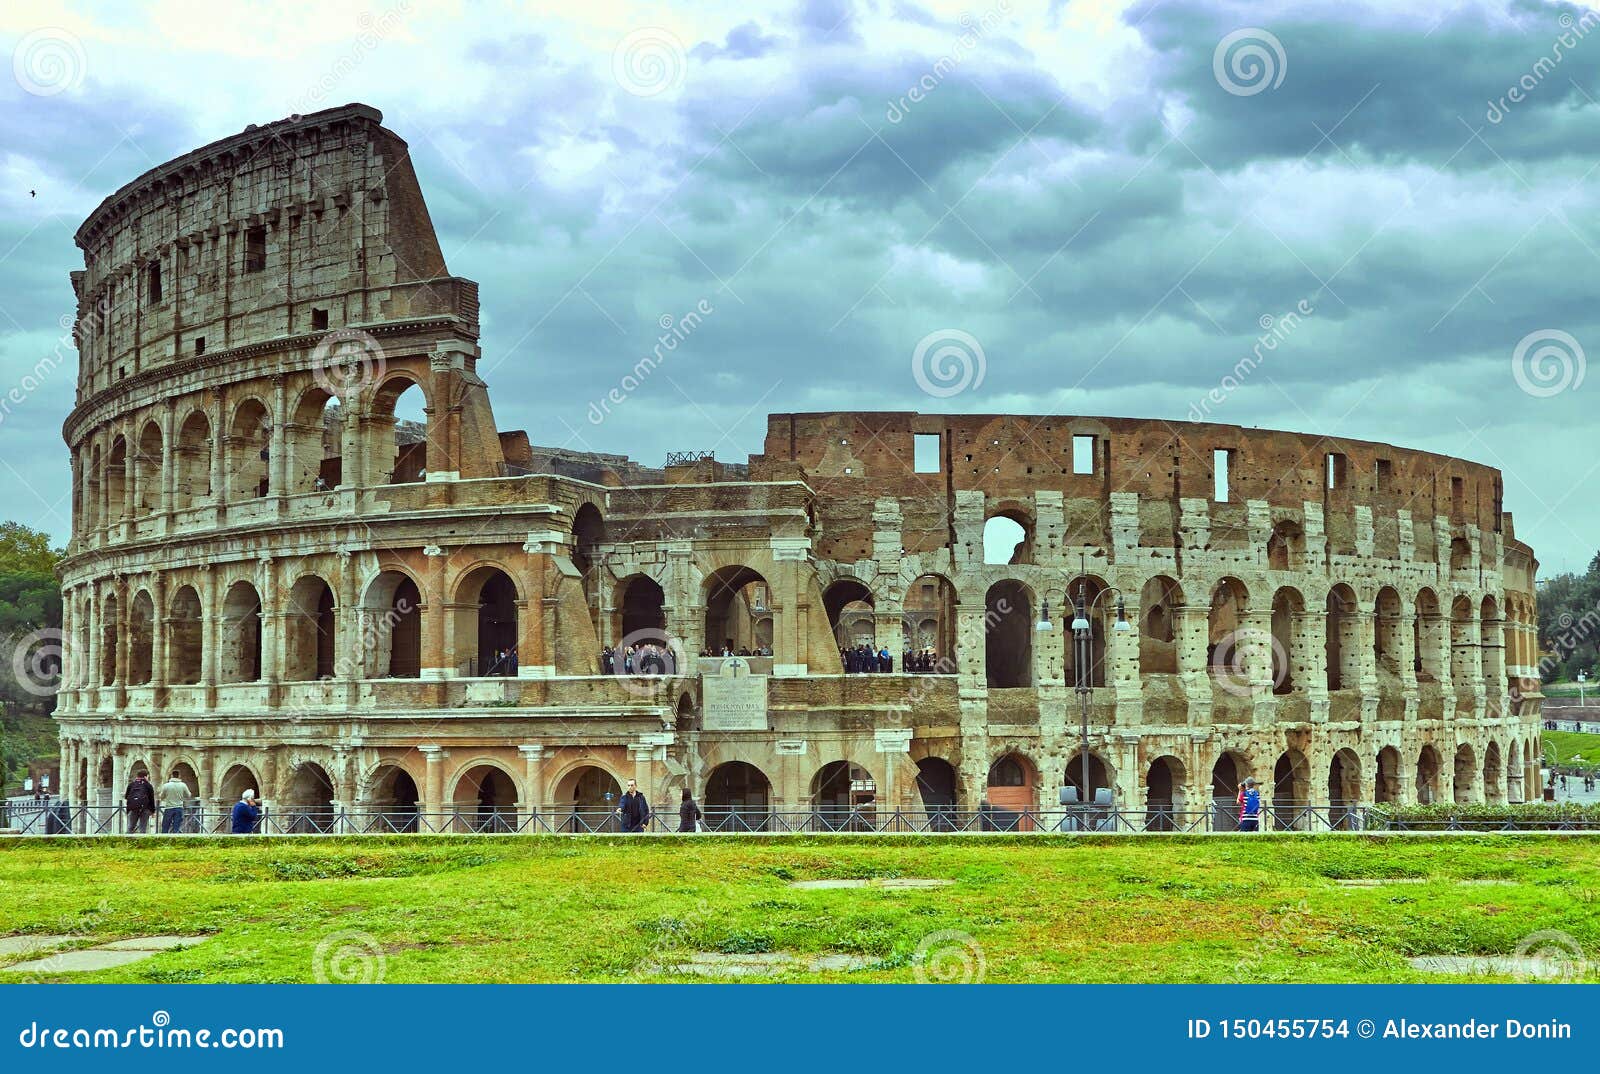 Colosseum In Rome Italy Ancient Roman Colosseum Is One Of The